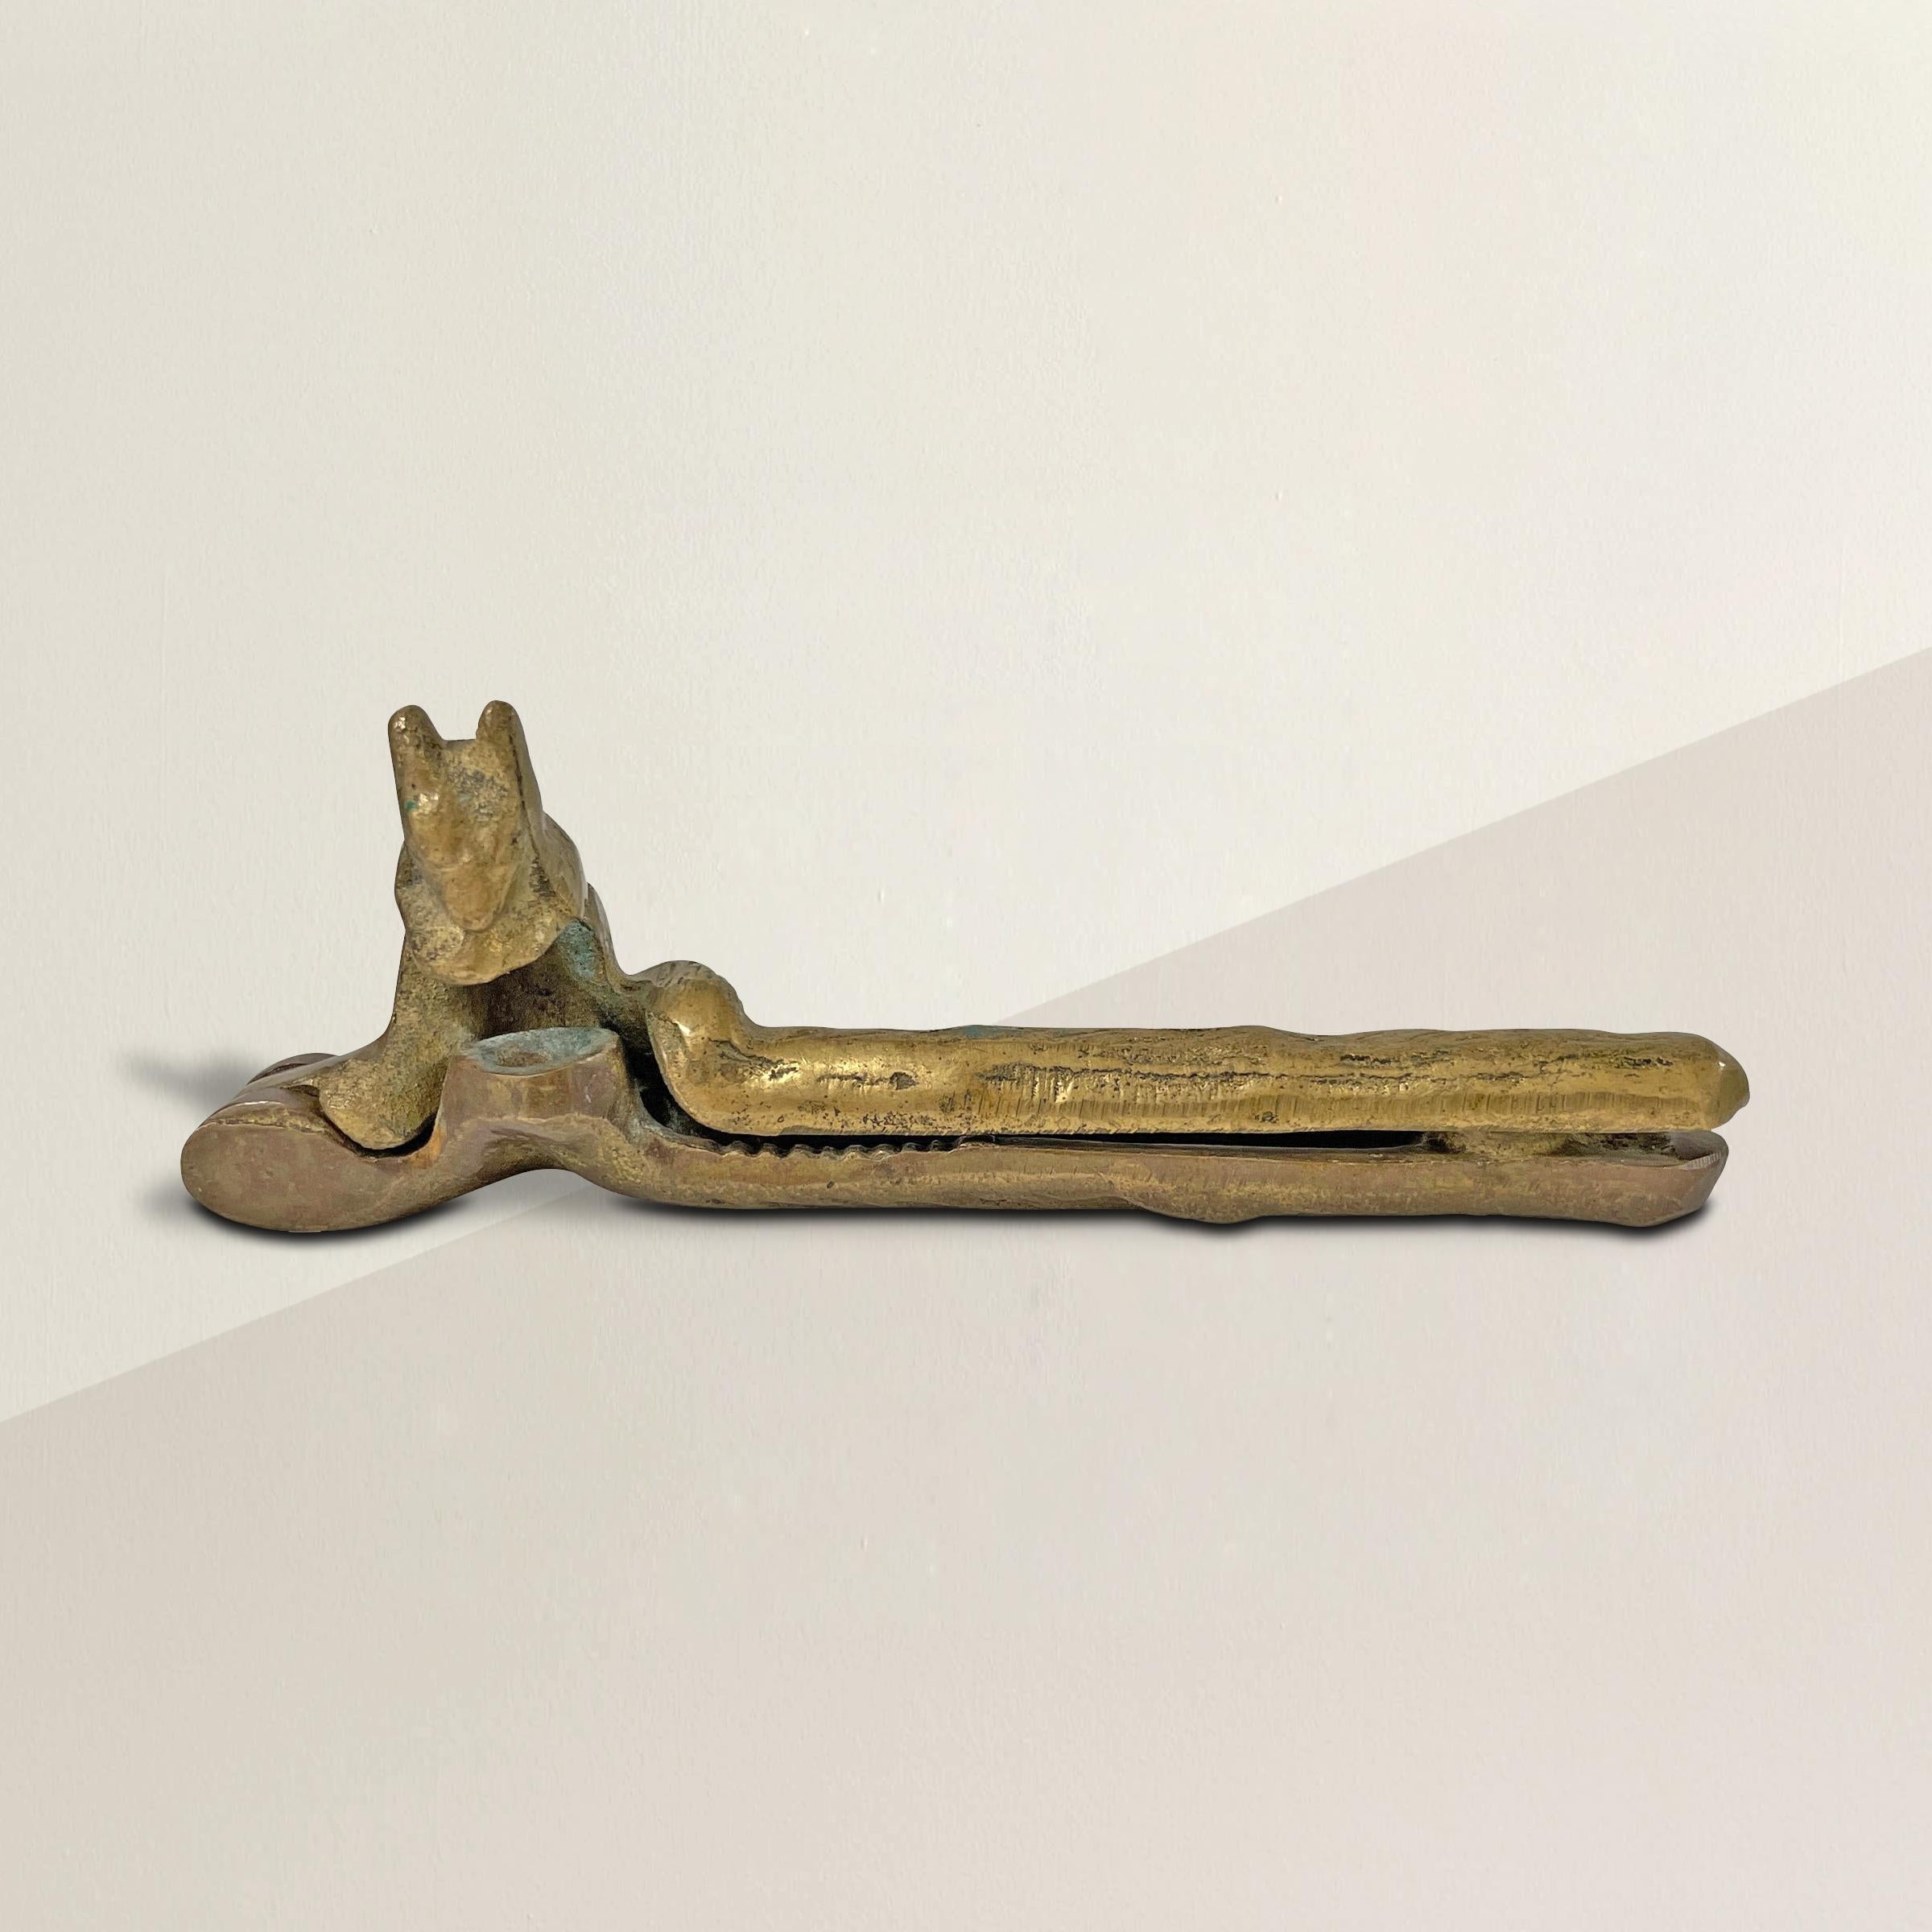 A whimsical early 20th century American cast bronze nut cracker depicting a squirrel on a log, where the nut rests on a stump and is held by the squirrel. So charming!